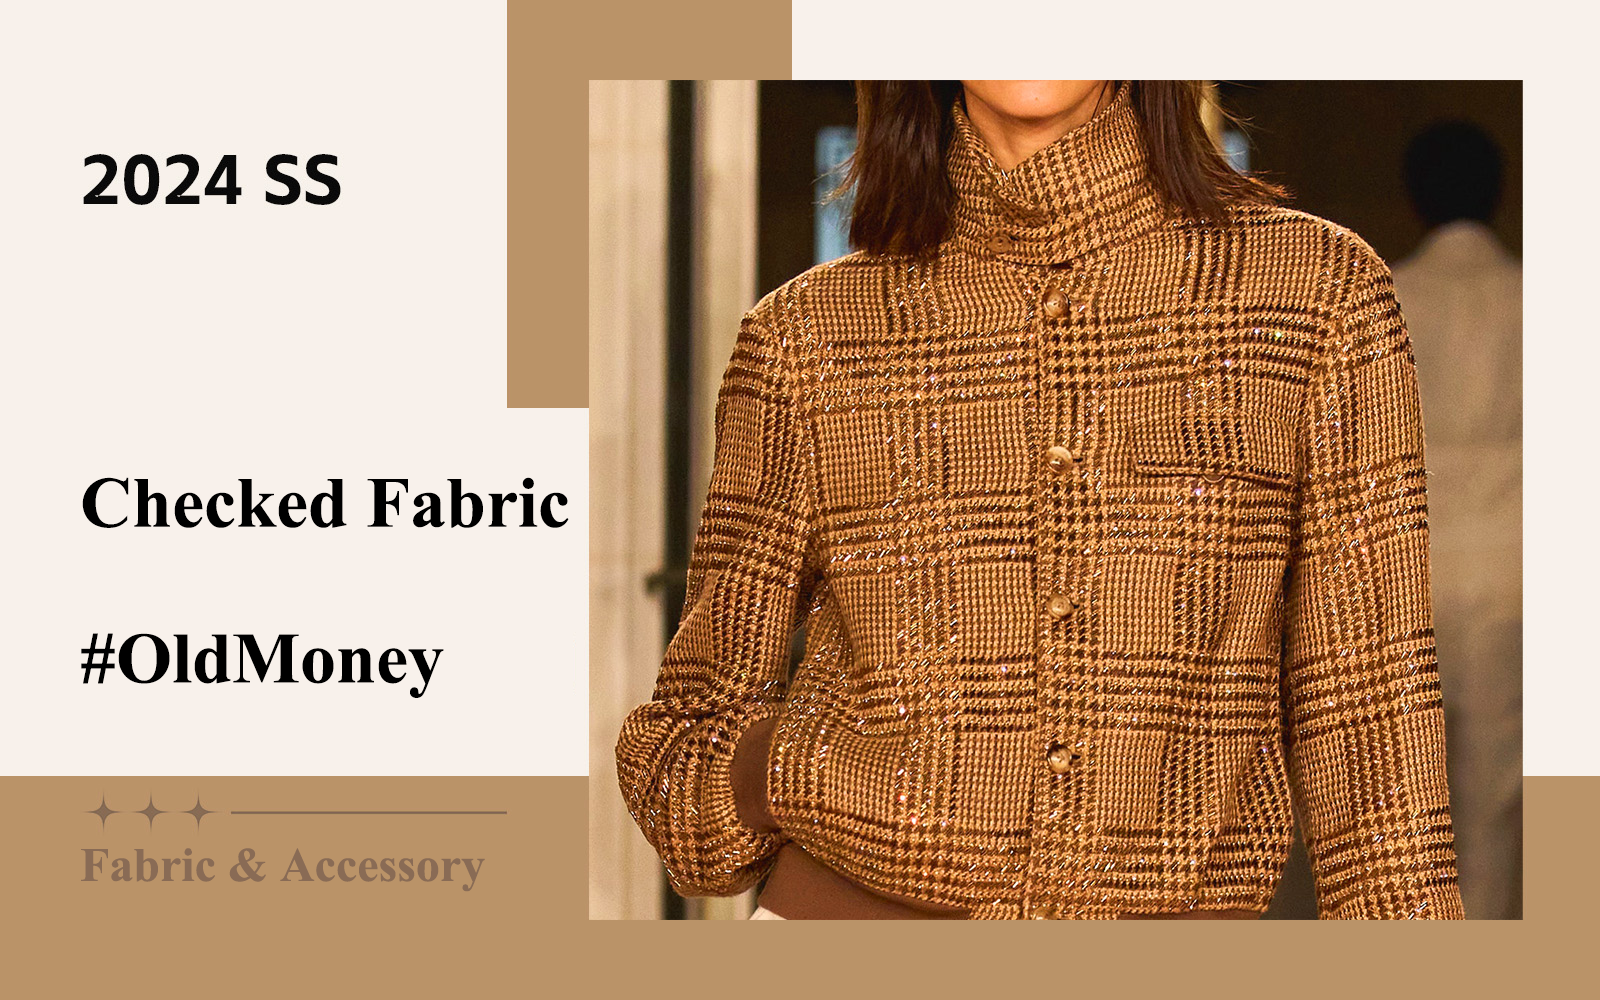 Checked Fabric -- The Fabric Trend for #OldMoney Womenswear